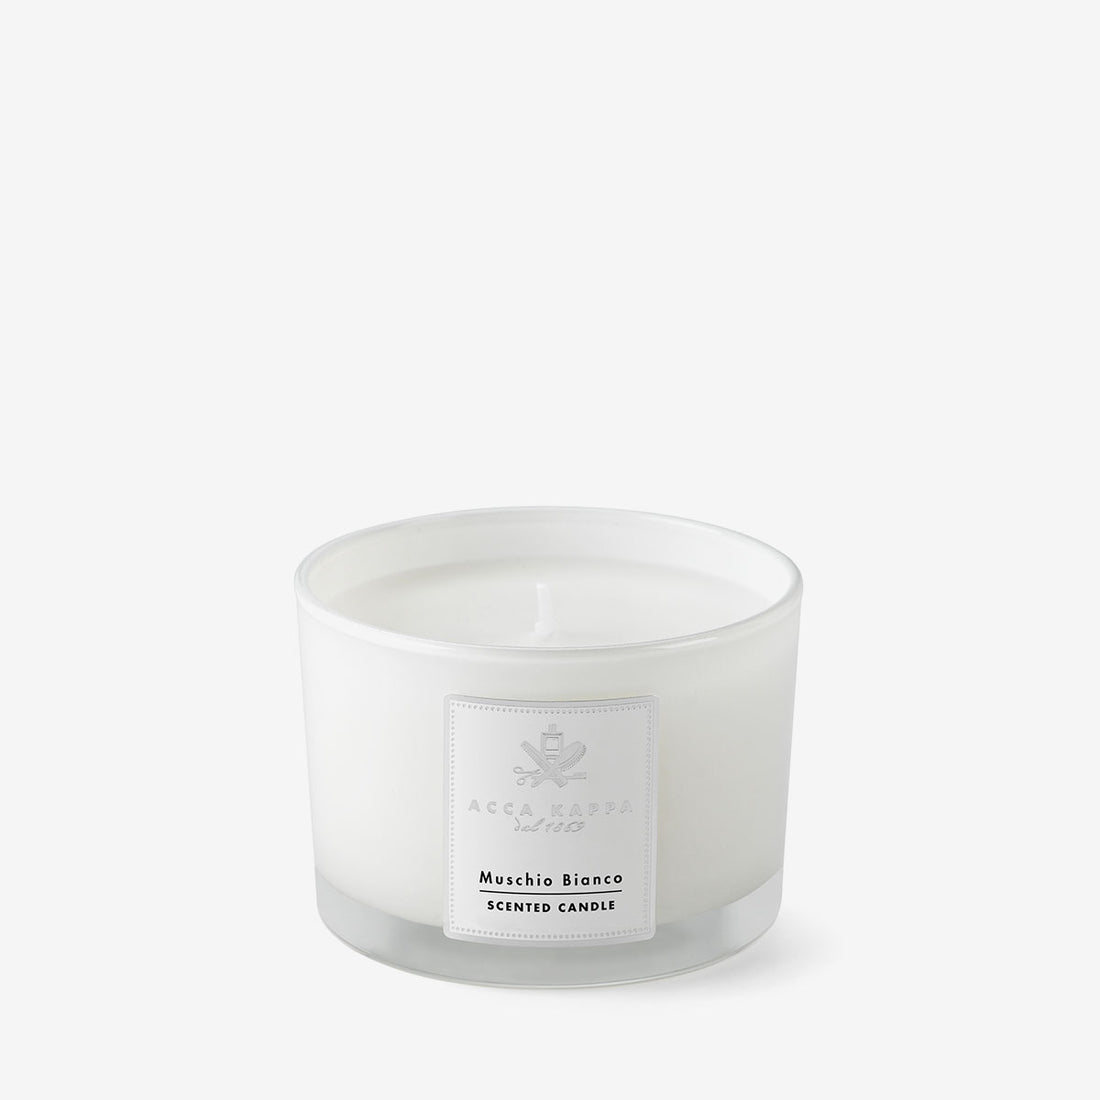 ACCA KAPPA White Moss Scented Candle (180g)